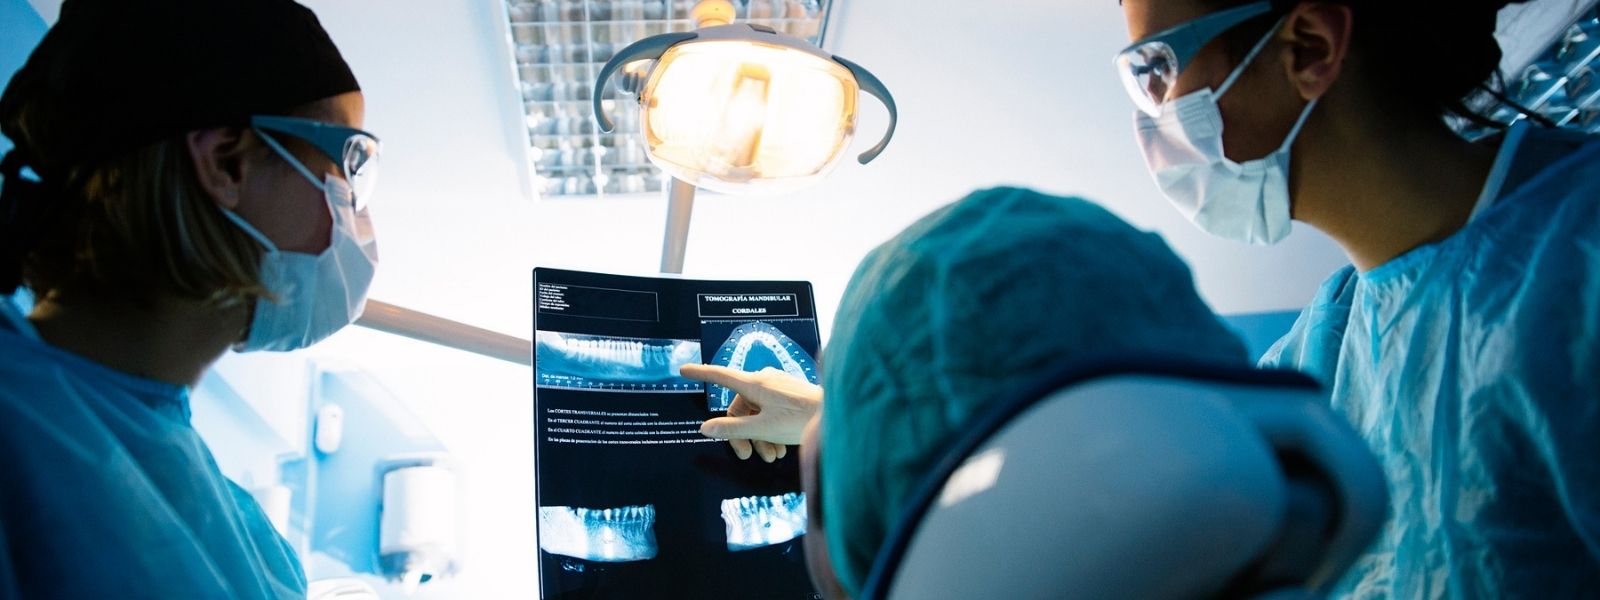 dentists checking x-rays